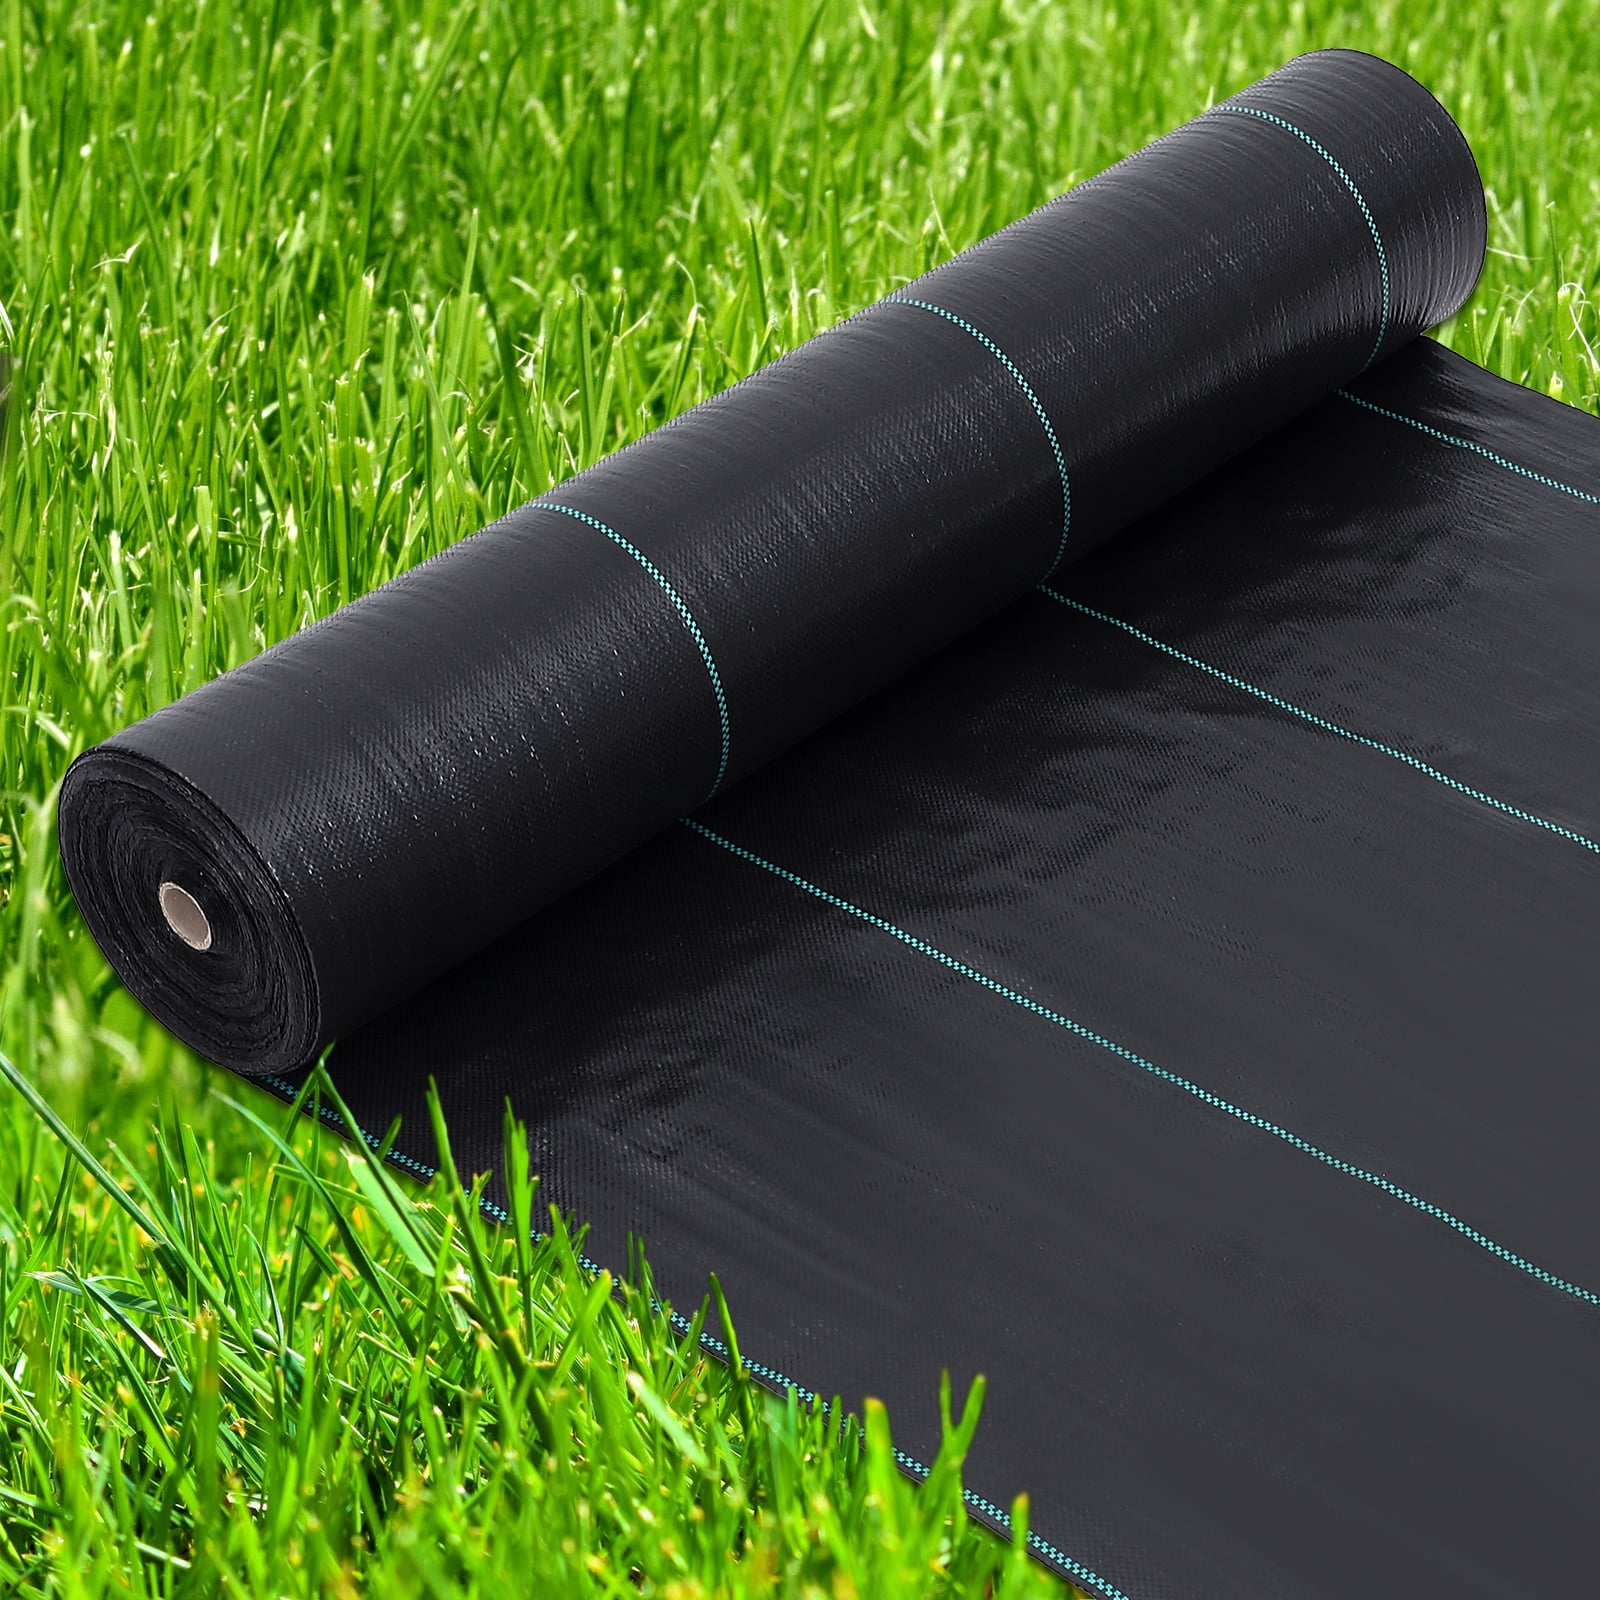 6.5FTX330FT Weed Barrier Landscape Fabric Heavy Duty, Premium 3.2oz Ground  Cover Weed Block Gardening Mat, Easy Setup & Superior Weed Control, for Erosion  Control, Weed Barrier 